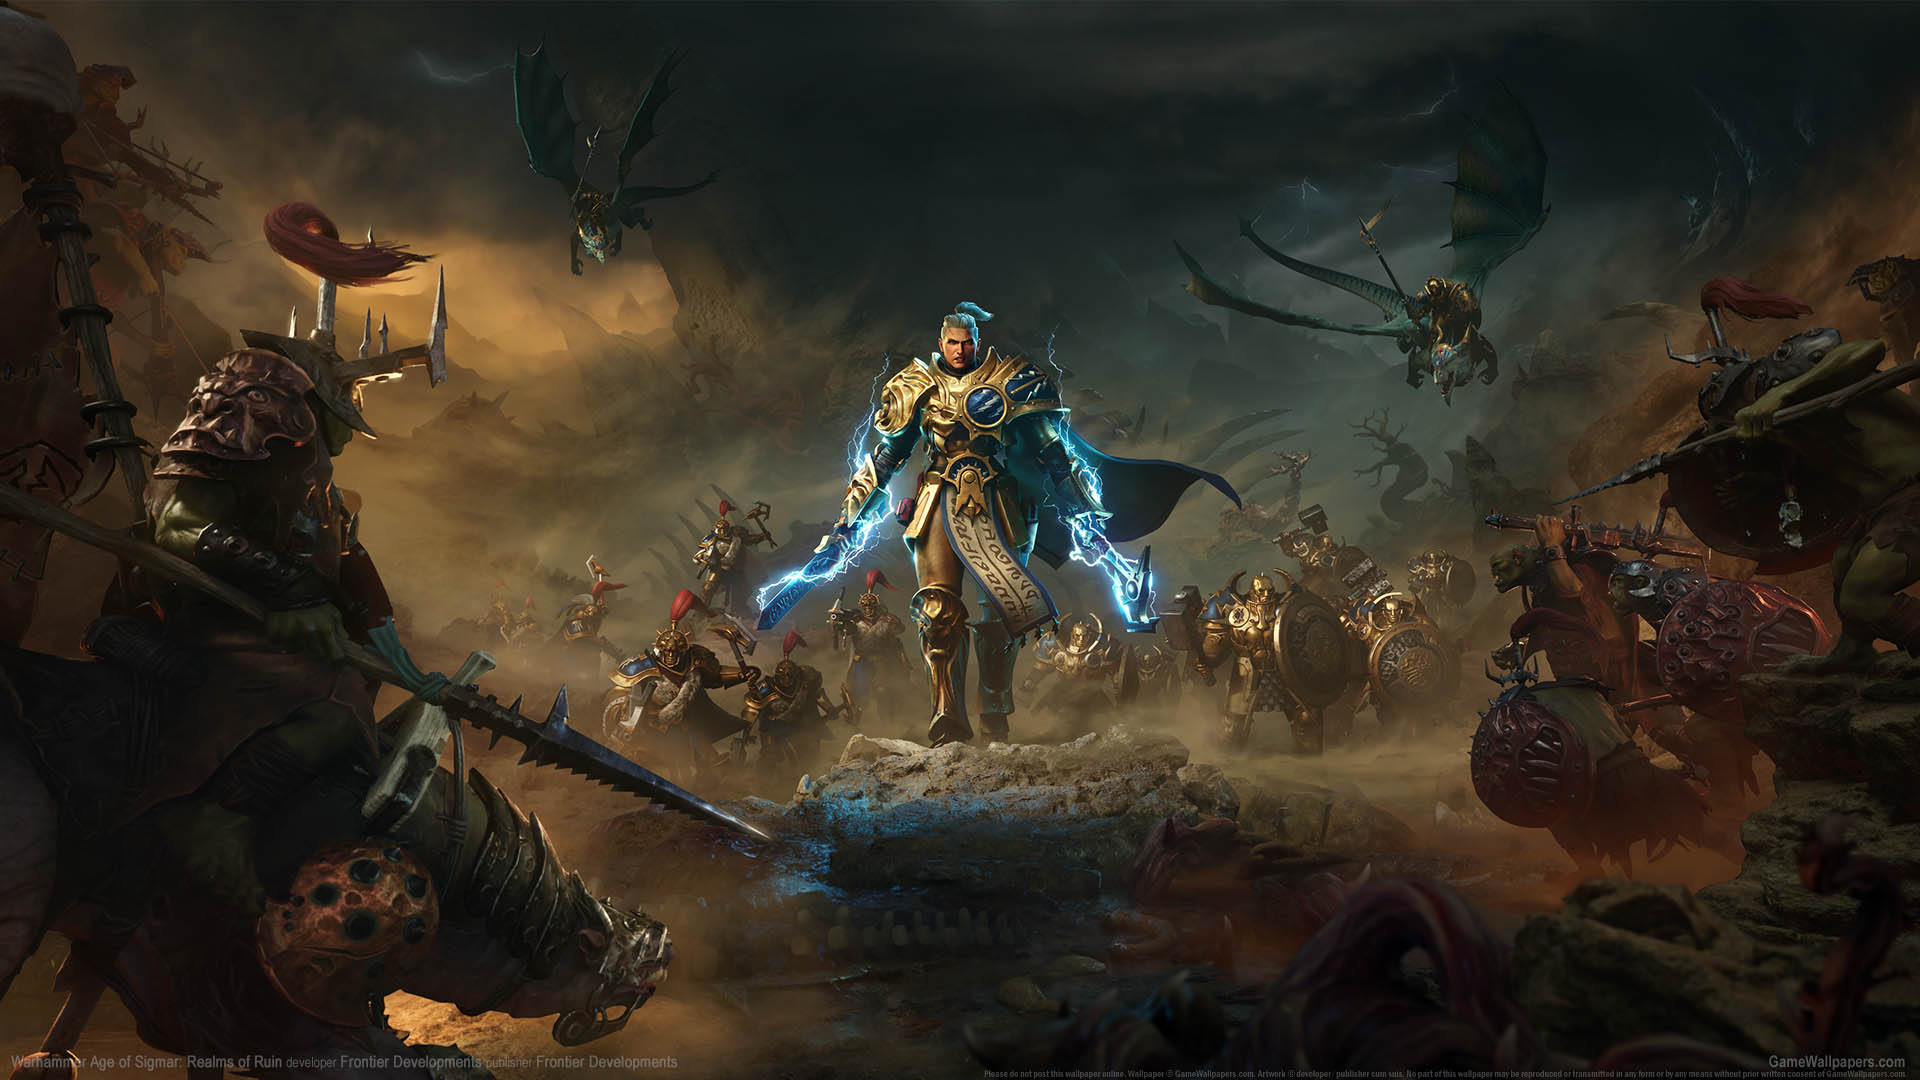 Warhammer Age of Sigmar: Realms of Ruin wallpaper 01 1920x1080